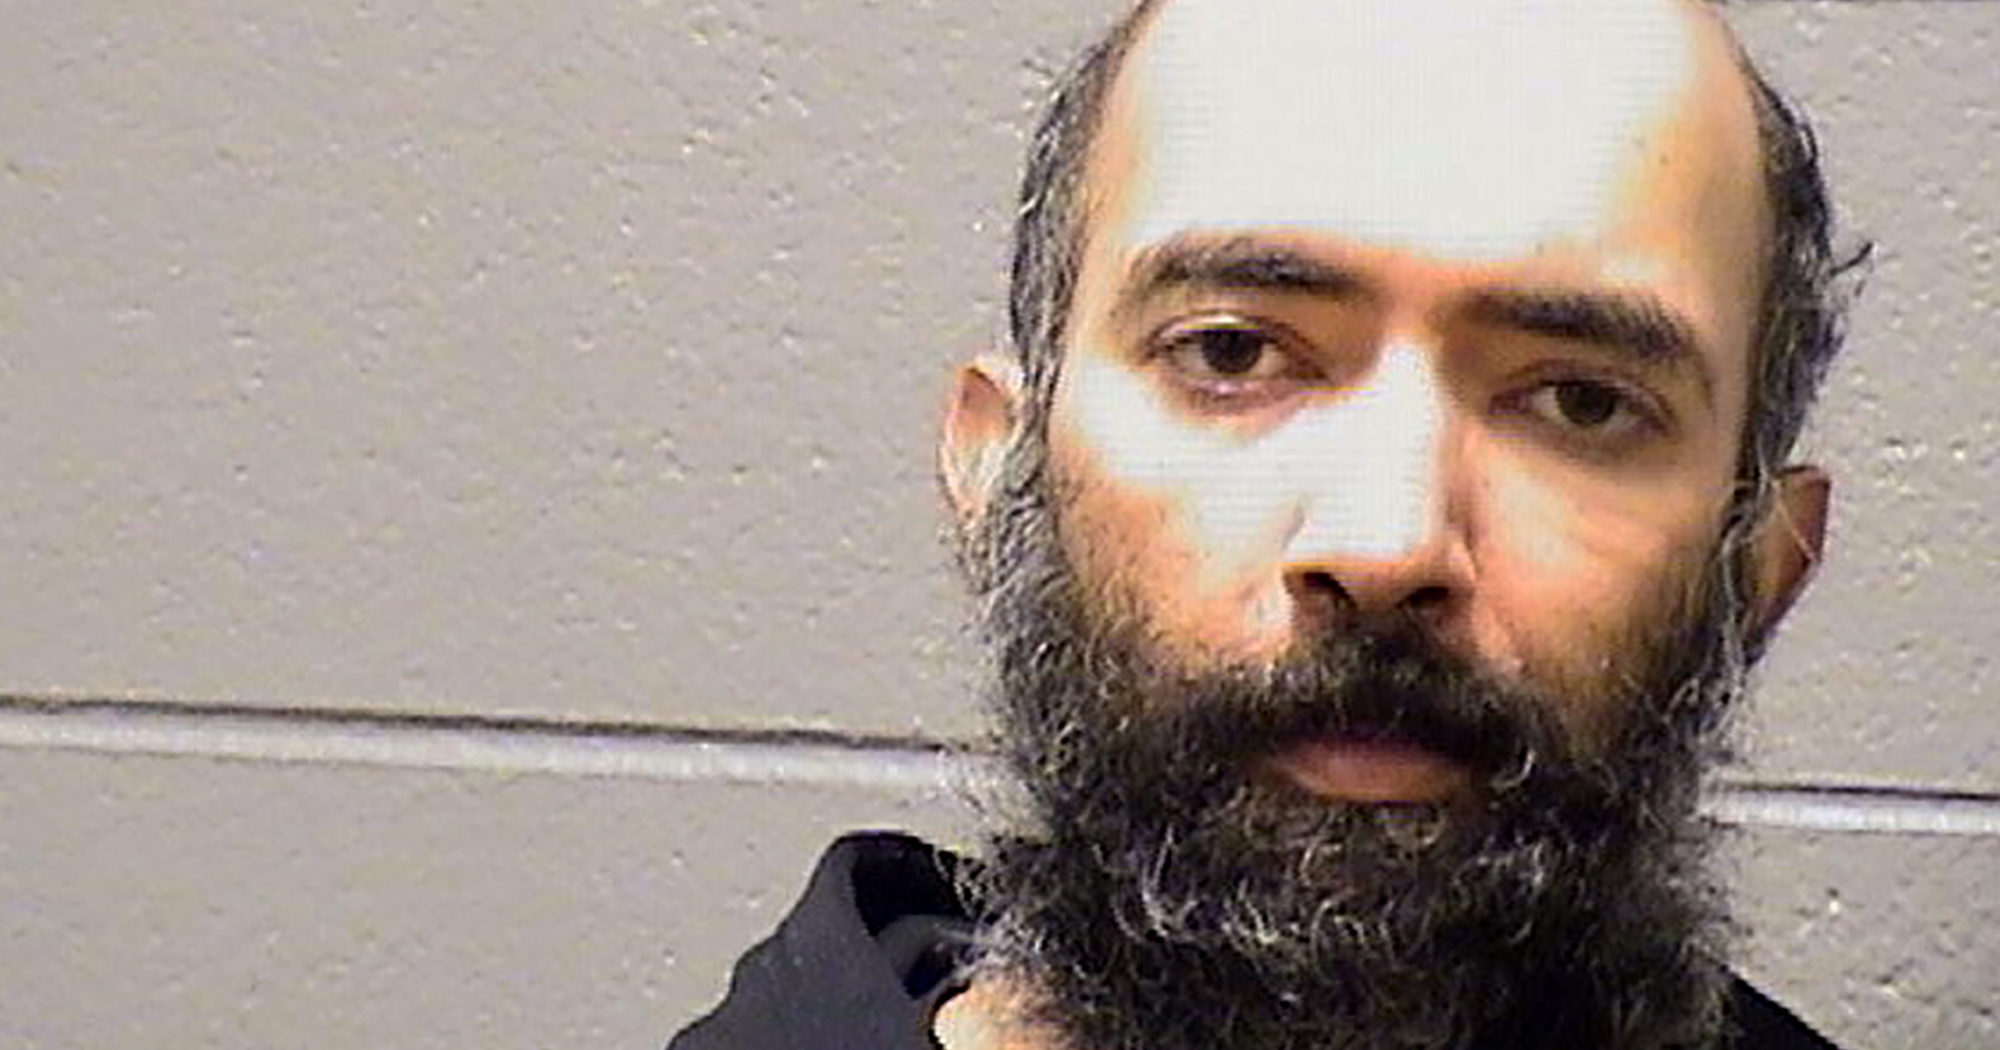 This Jan. 16, 2021, booking photo provided by the Cook County Sheriff's Office shows Aditya Singh.